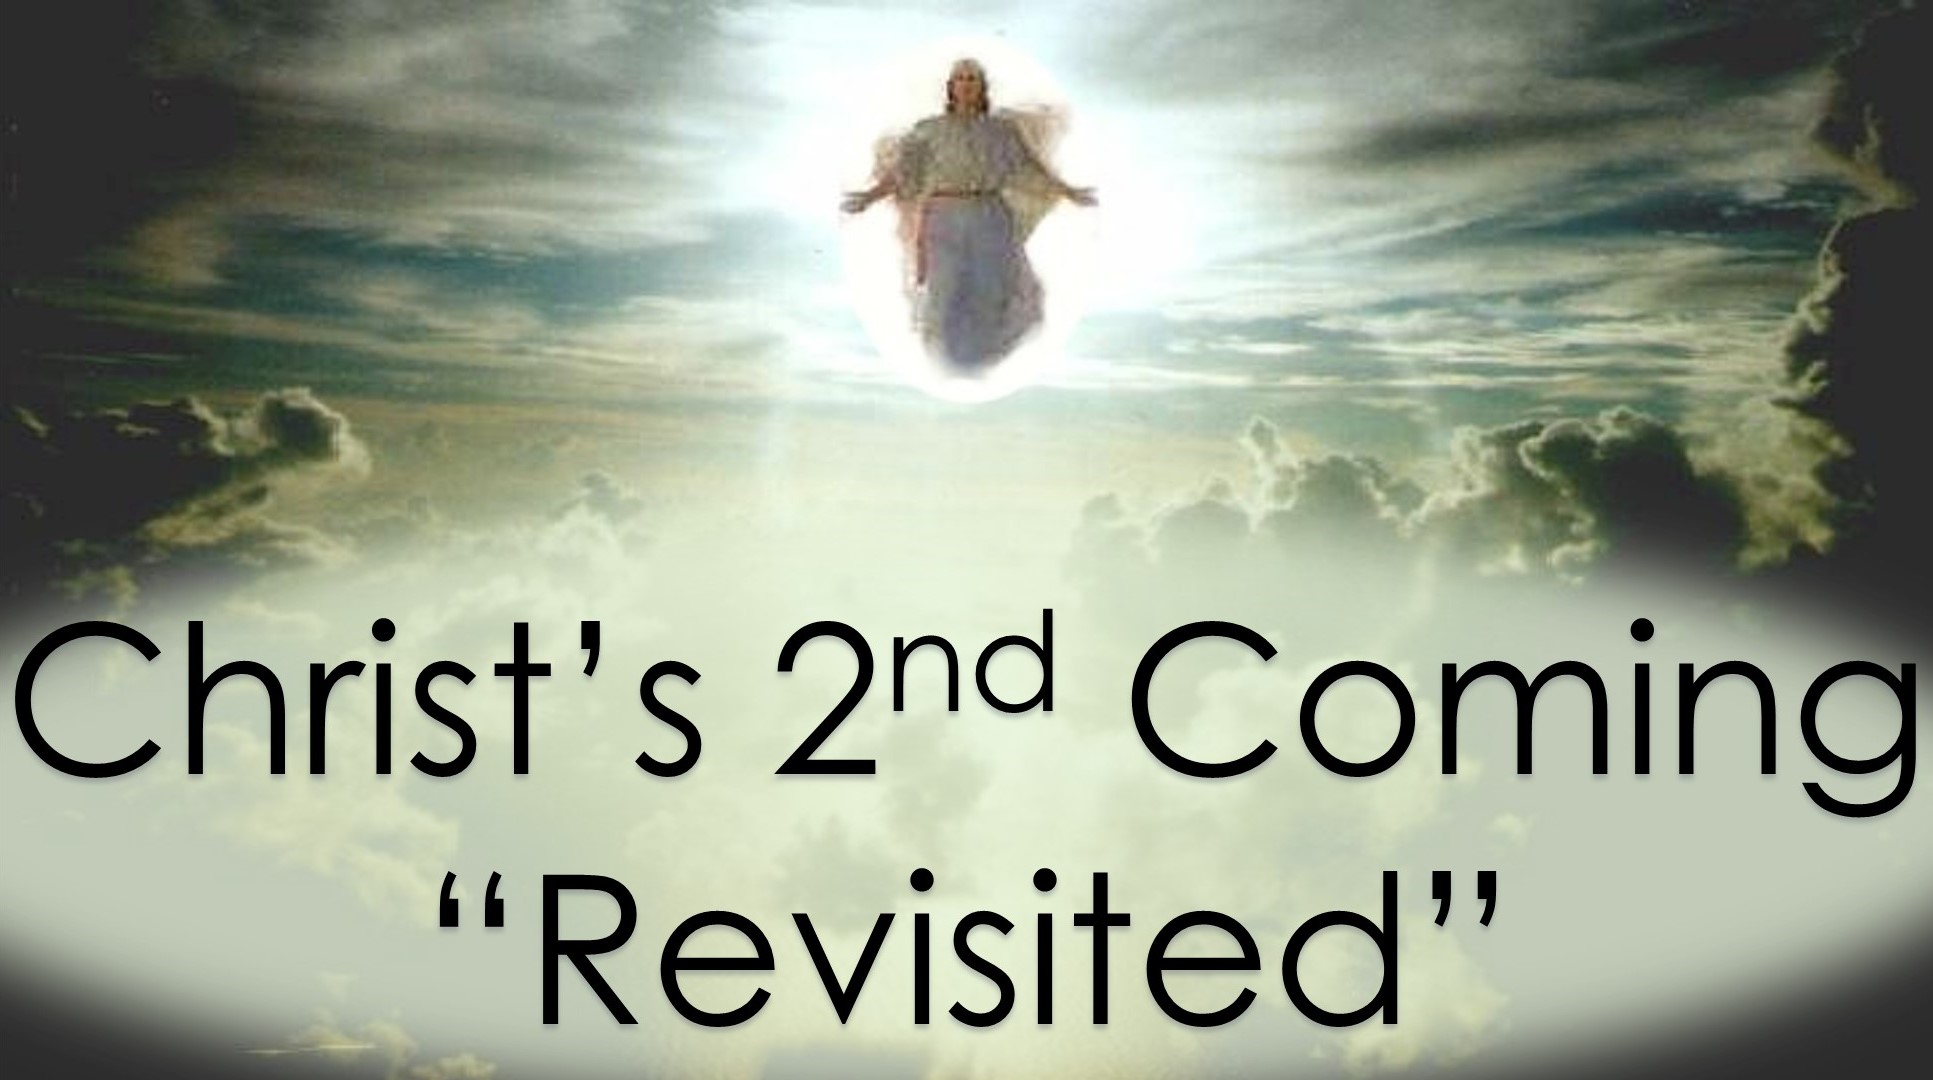 You are currently viewing Christ’s 2nd Coming “Revisited” – May 15th